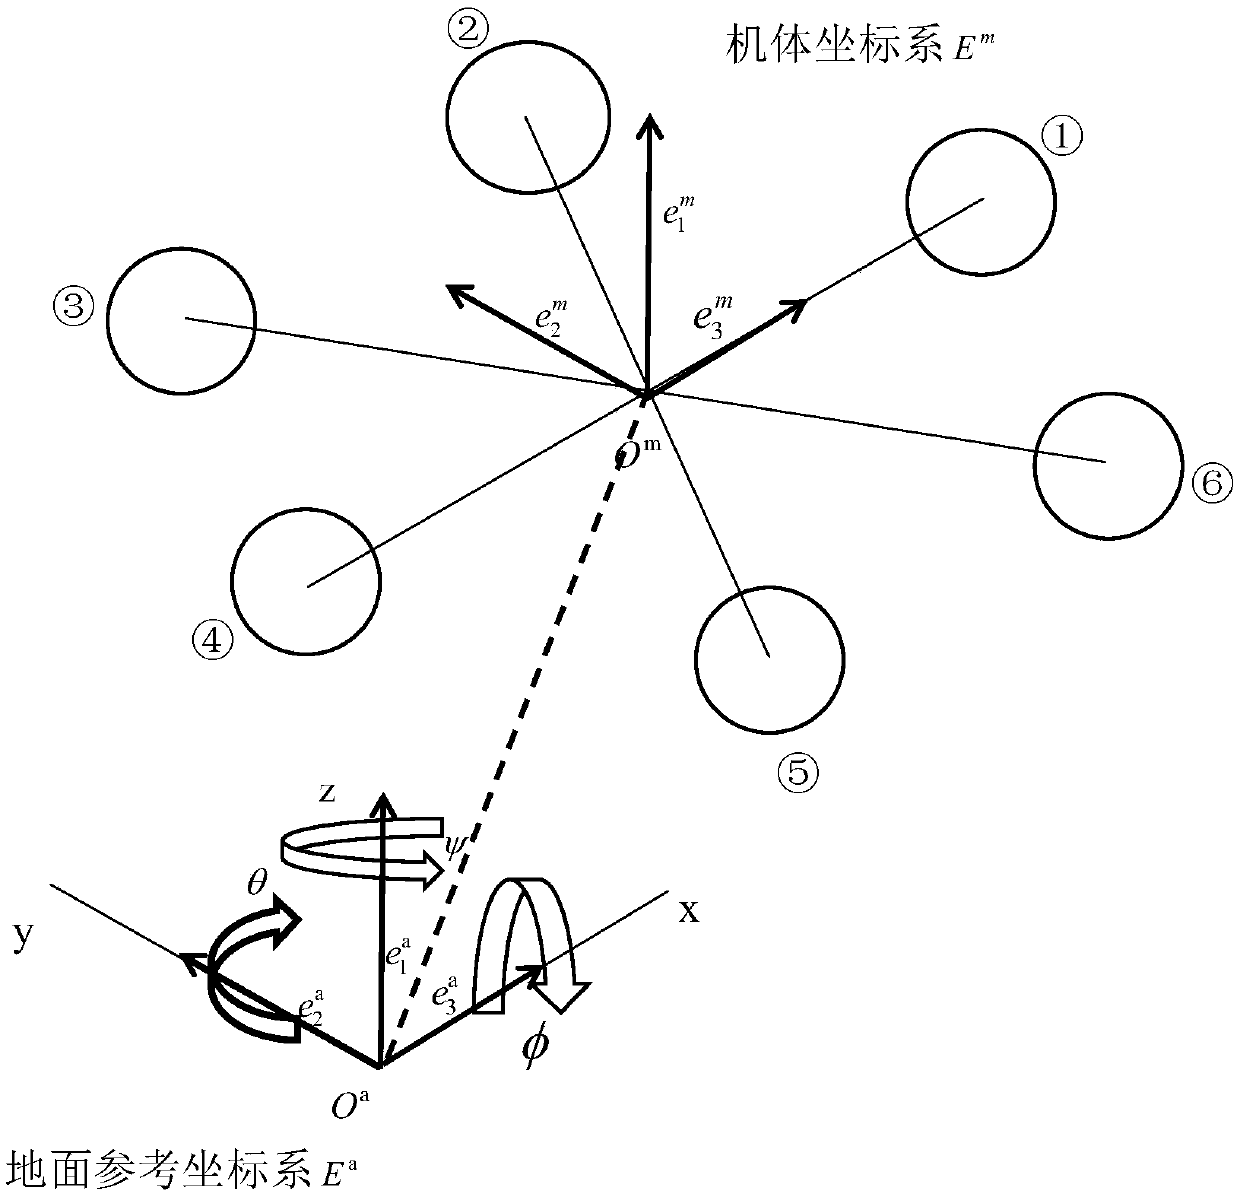 Design method of control system of flying robot carrying redundancy mechanical arm